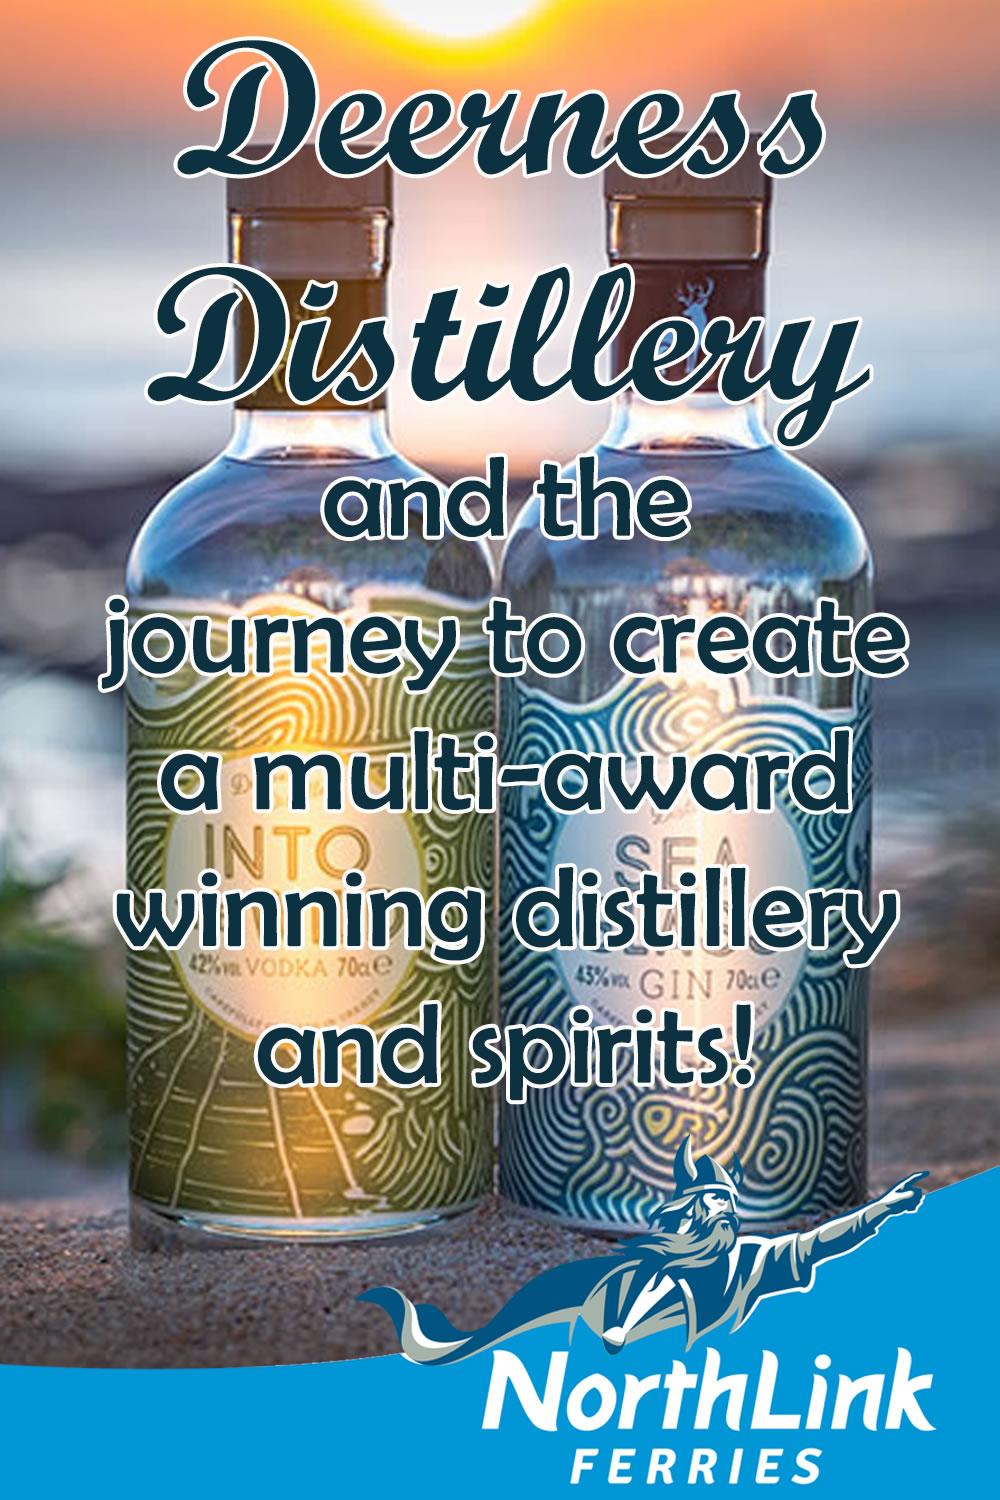 Deerness Distillery and the journey to create a multi-award winning distillery and spirits!